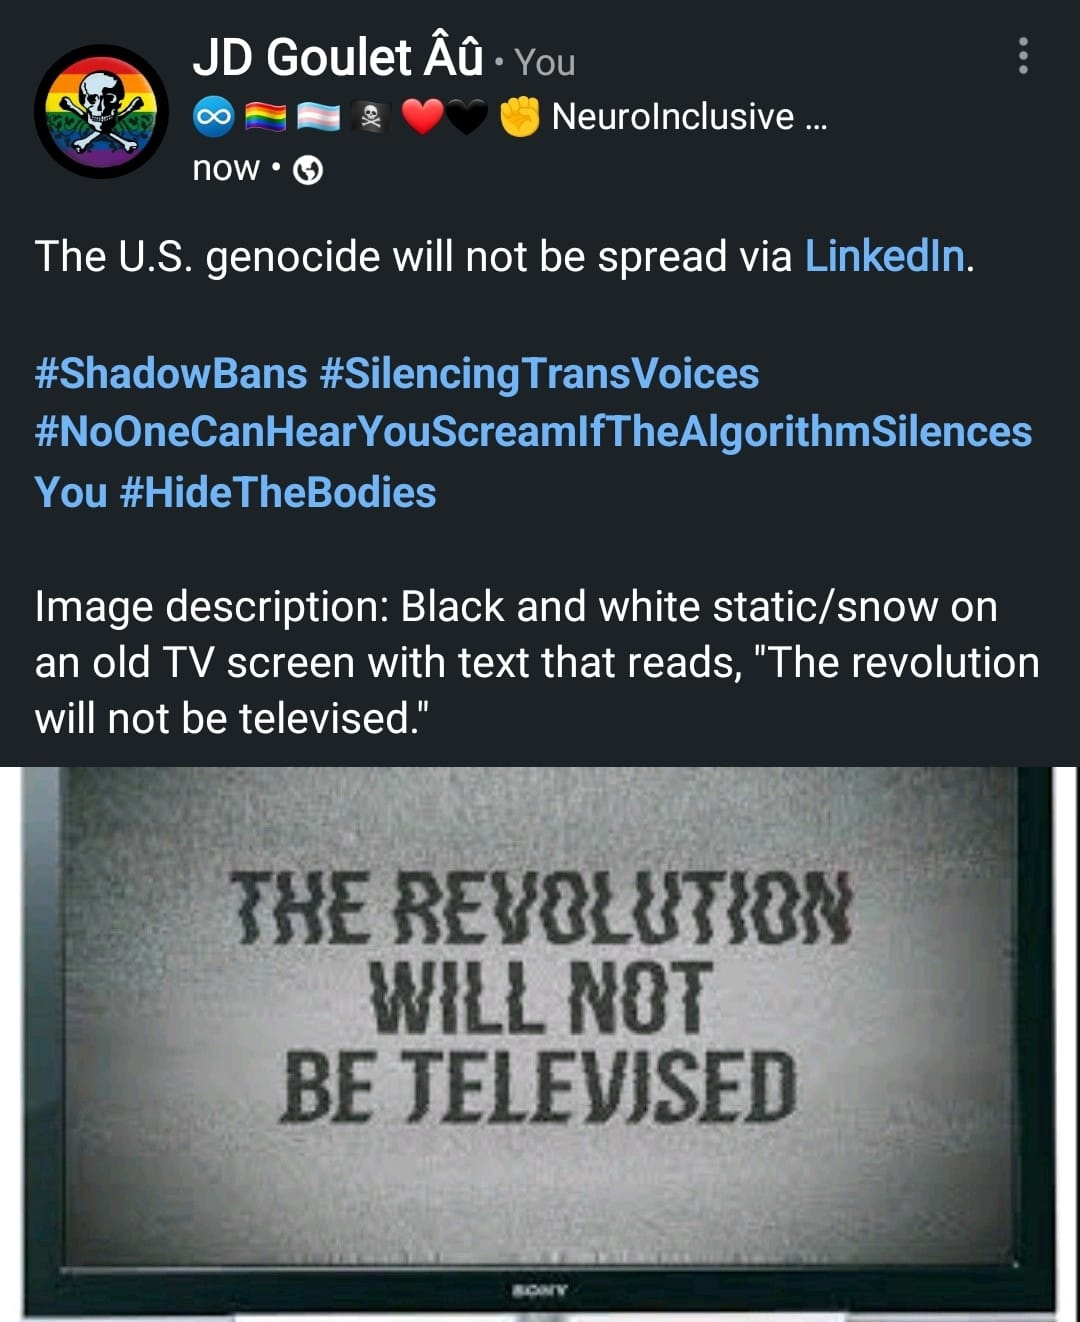 This screen shot from LinkedIn shows black and white static/snow on an old TV screen with text that reads, "The revolution will not be televised" beneath my post, "The U.S. genocide will not be spread via LinkedIn" with the hashtags Shadow Bans, Silencing Trans Voices, No One Can Hear You Scream If The Algorithm Silences You and Hide The Bodies.